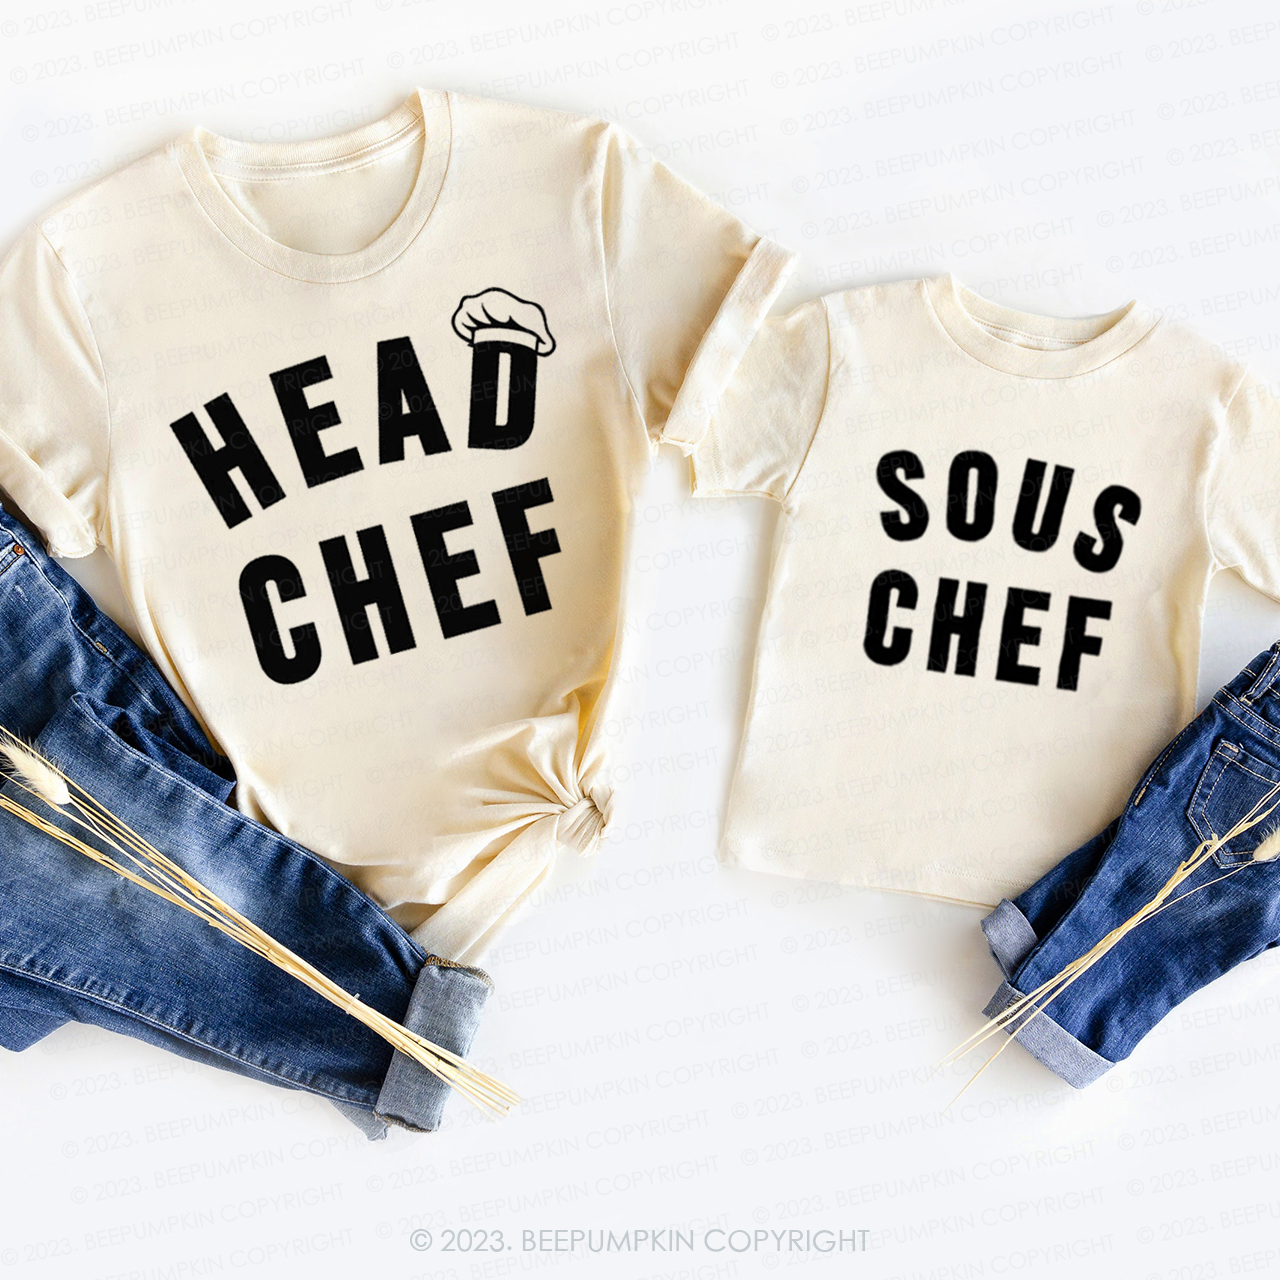 Head Chef Sous Chef T-Shirts For Mom&Me